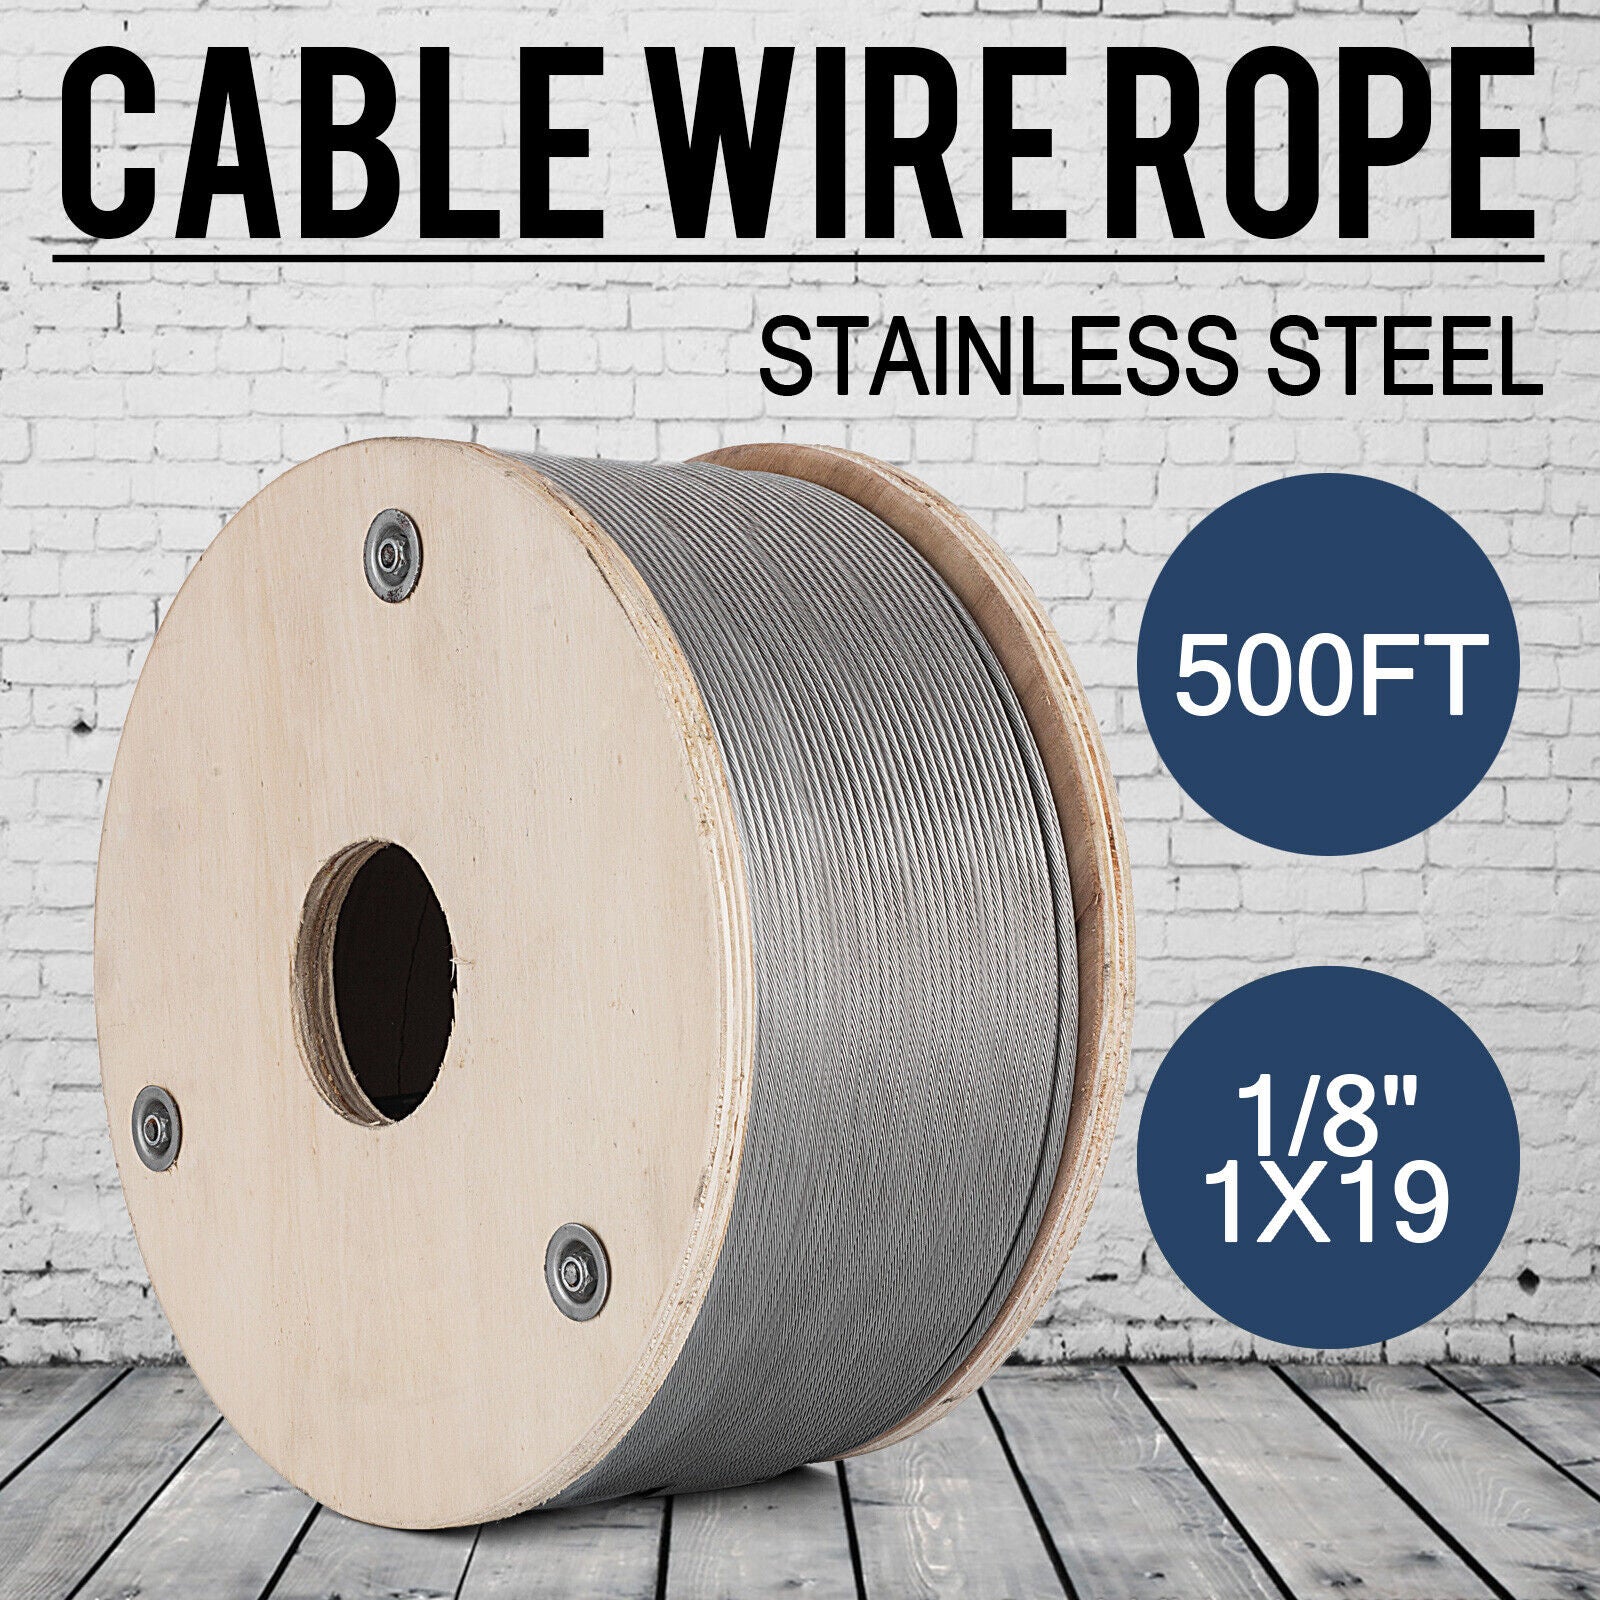 T316 Stainless Steel Cable Wire Rope 500FT 1/8